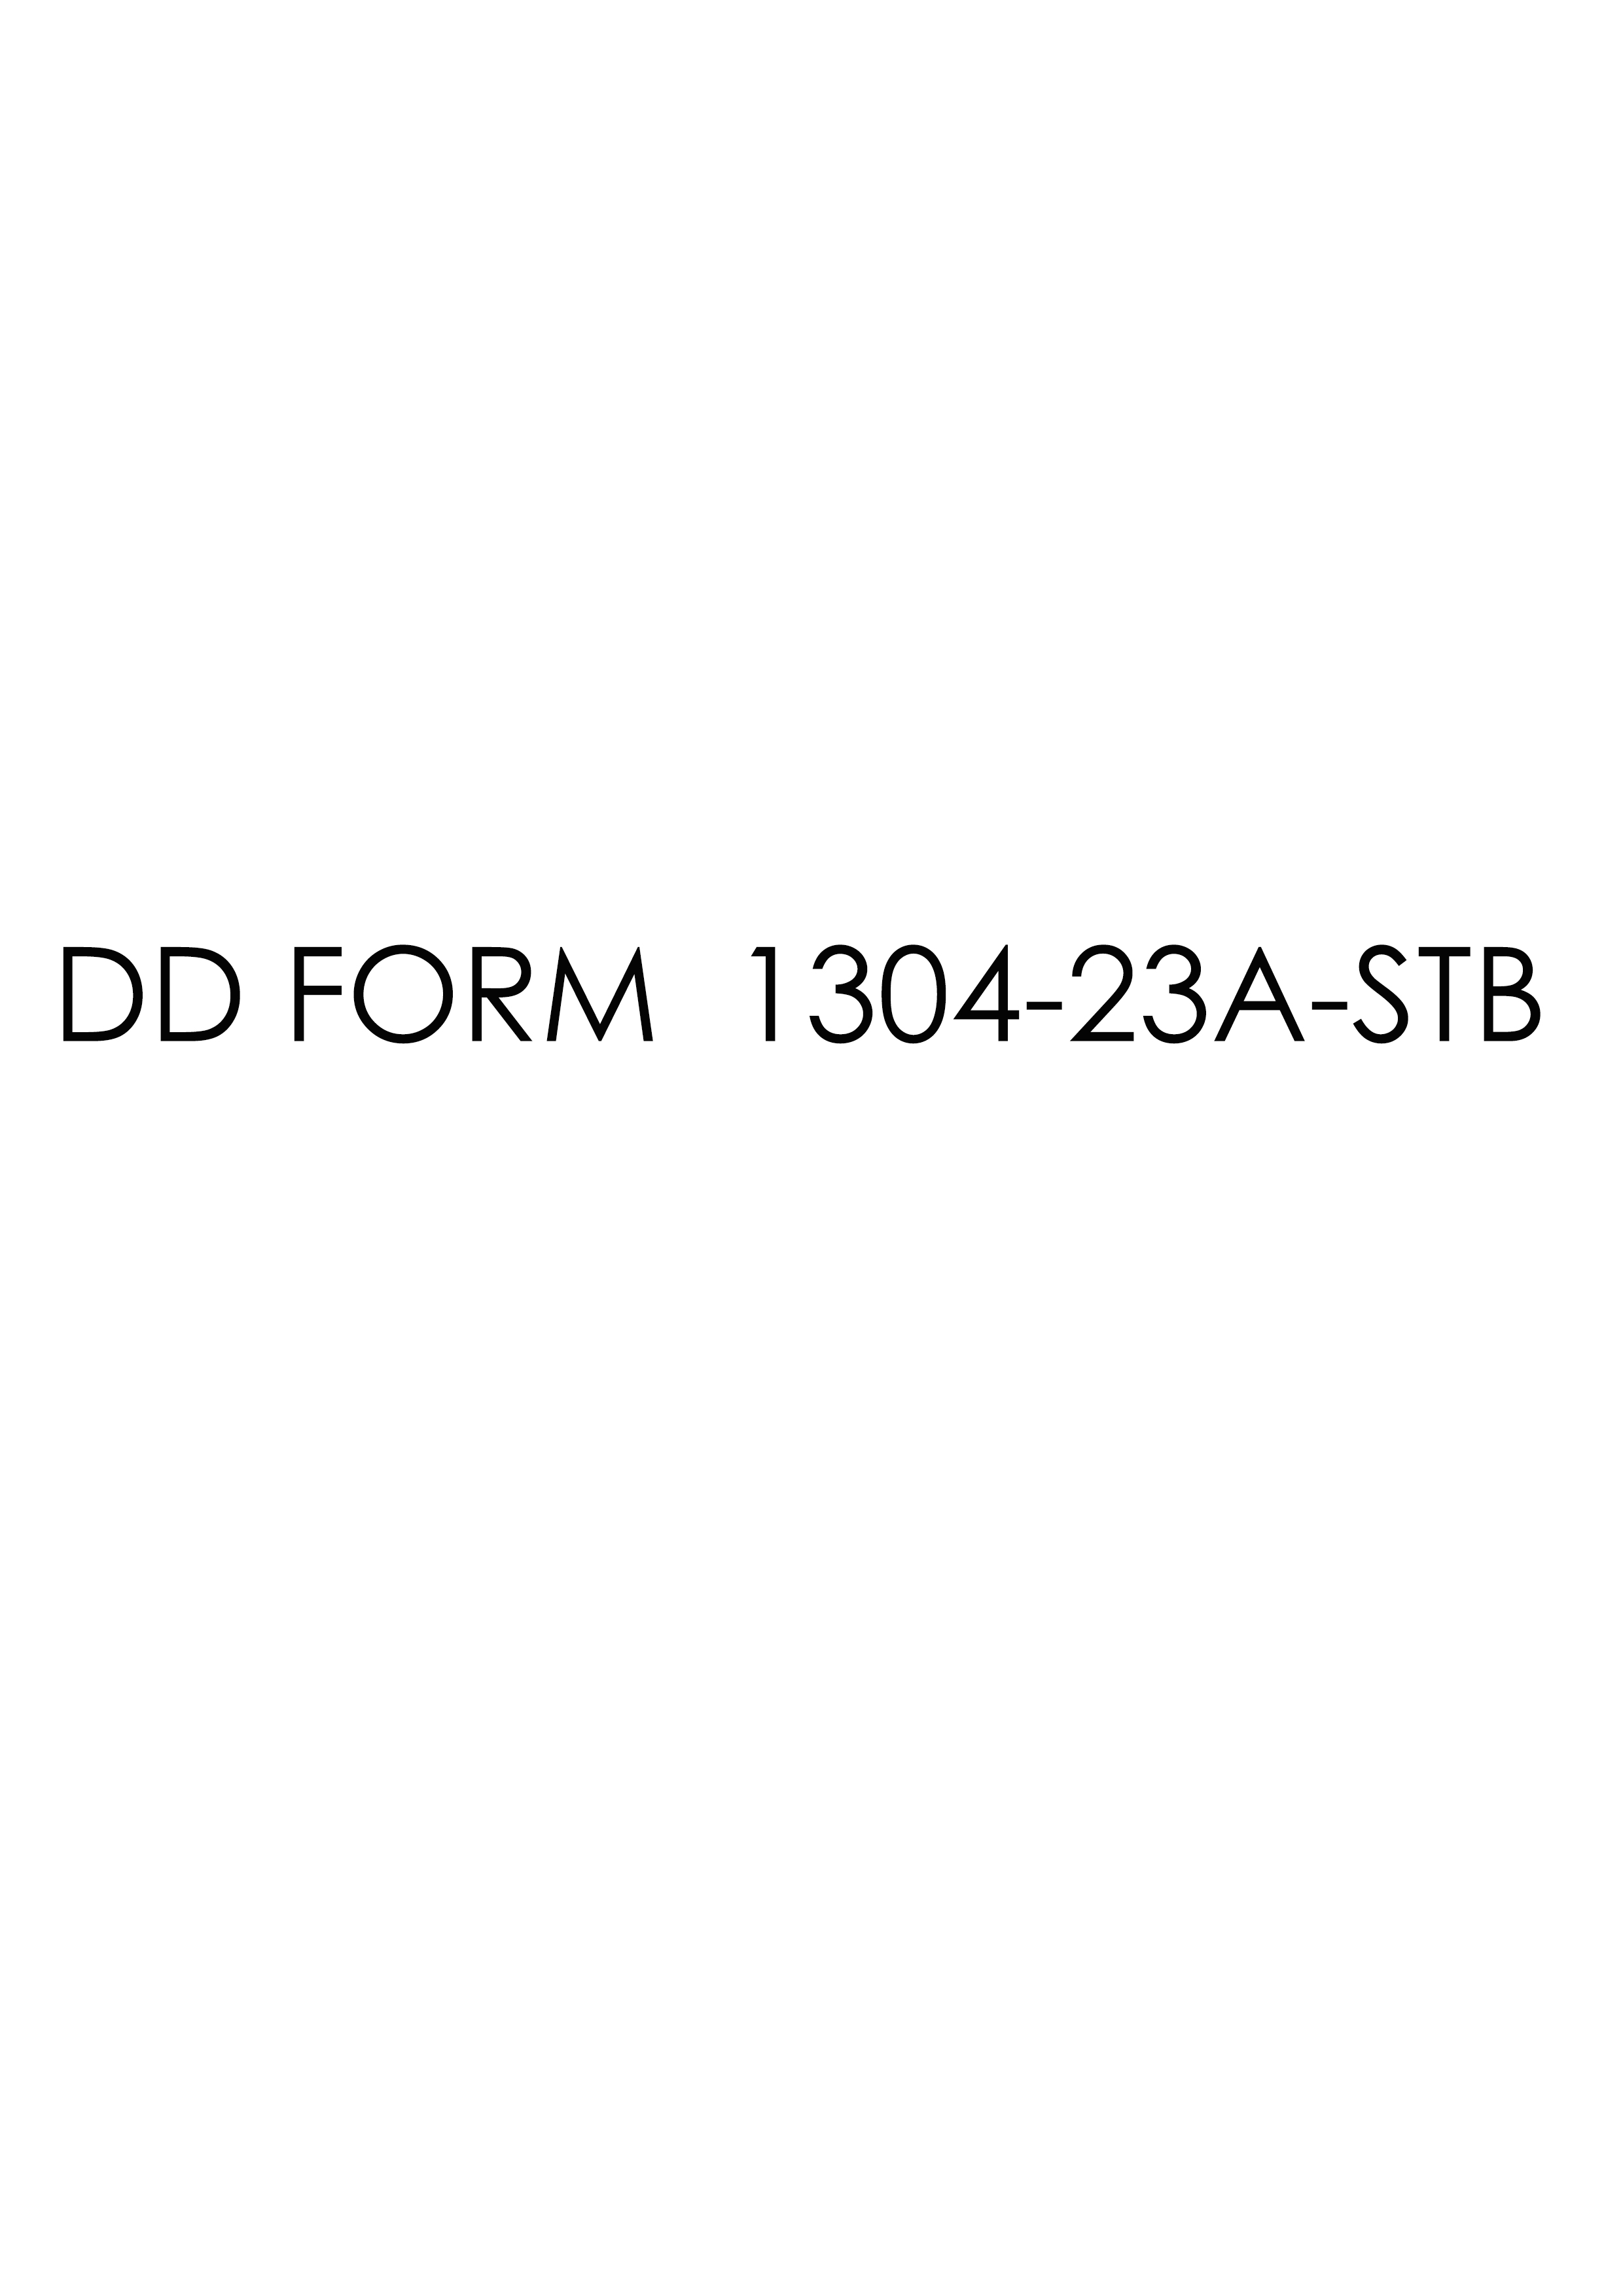 Download Fillable dd Form 1304-23A-STB